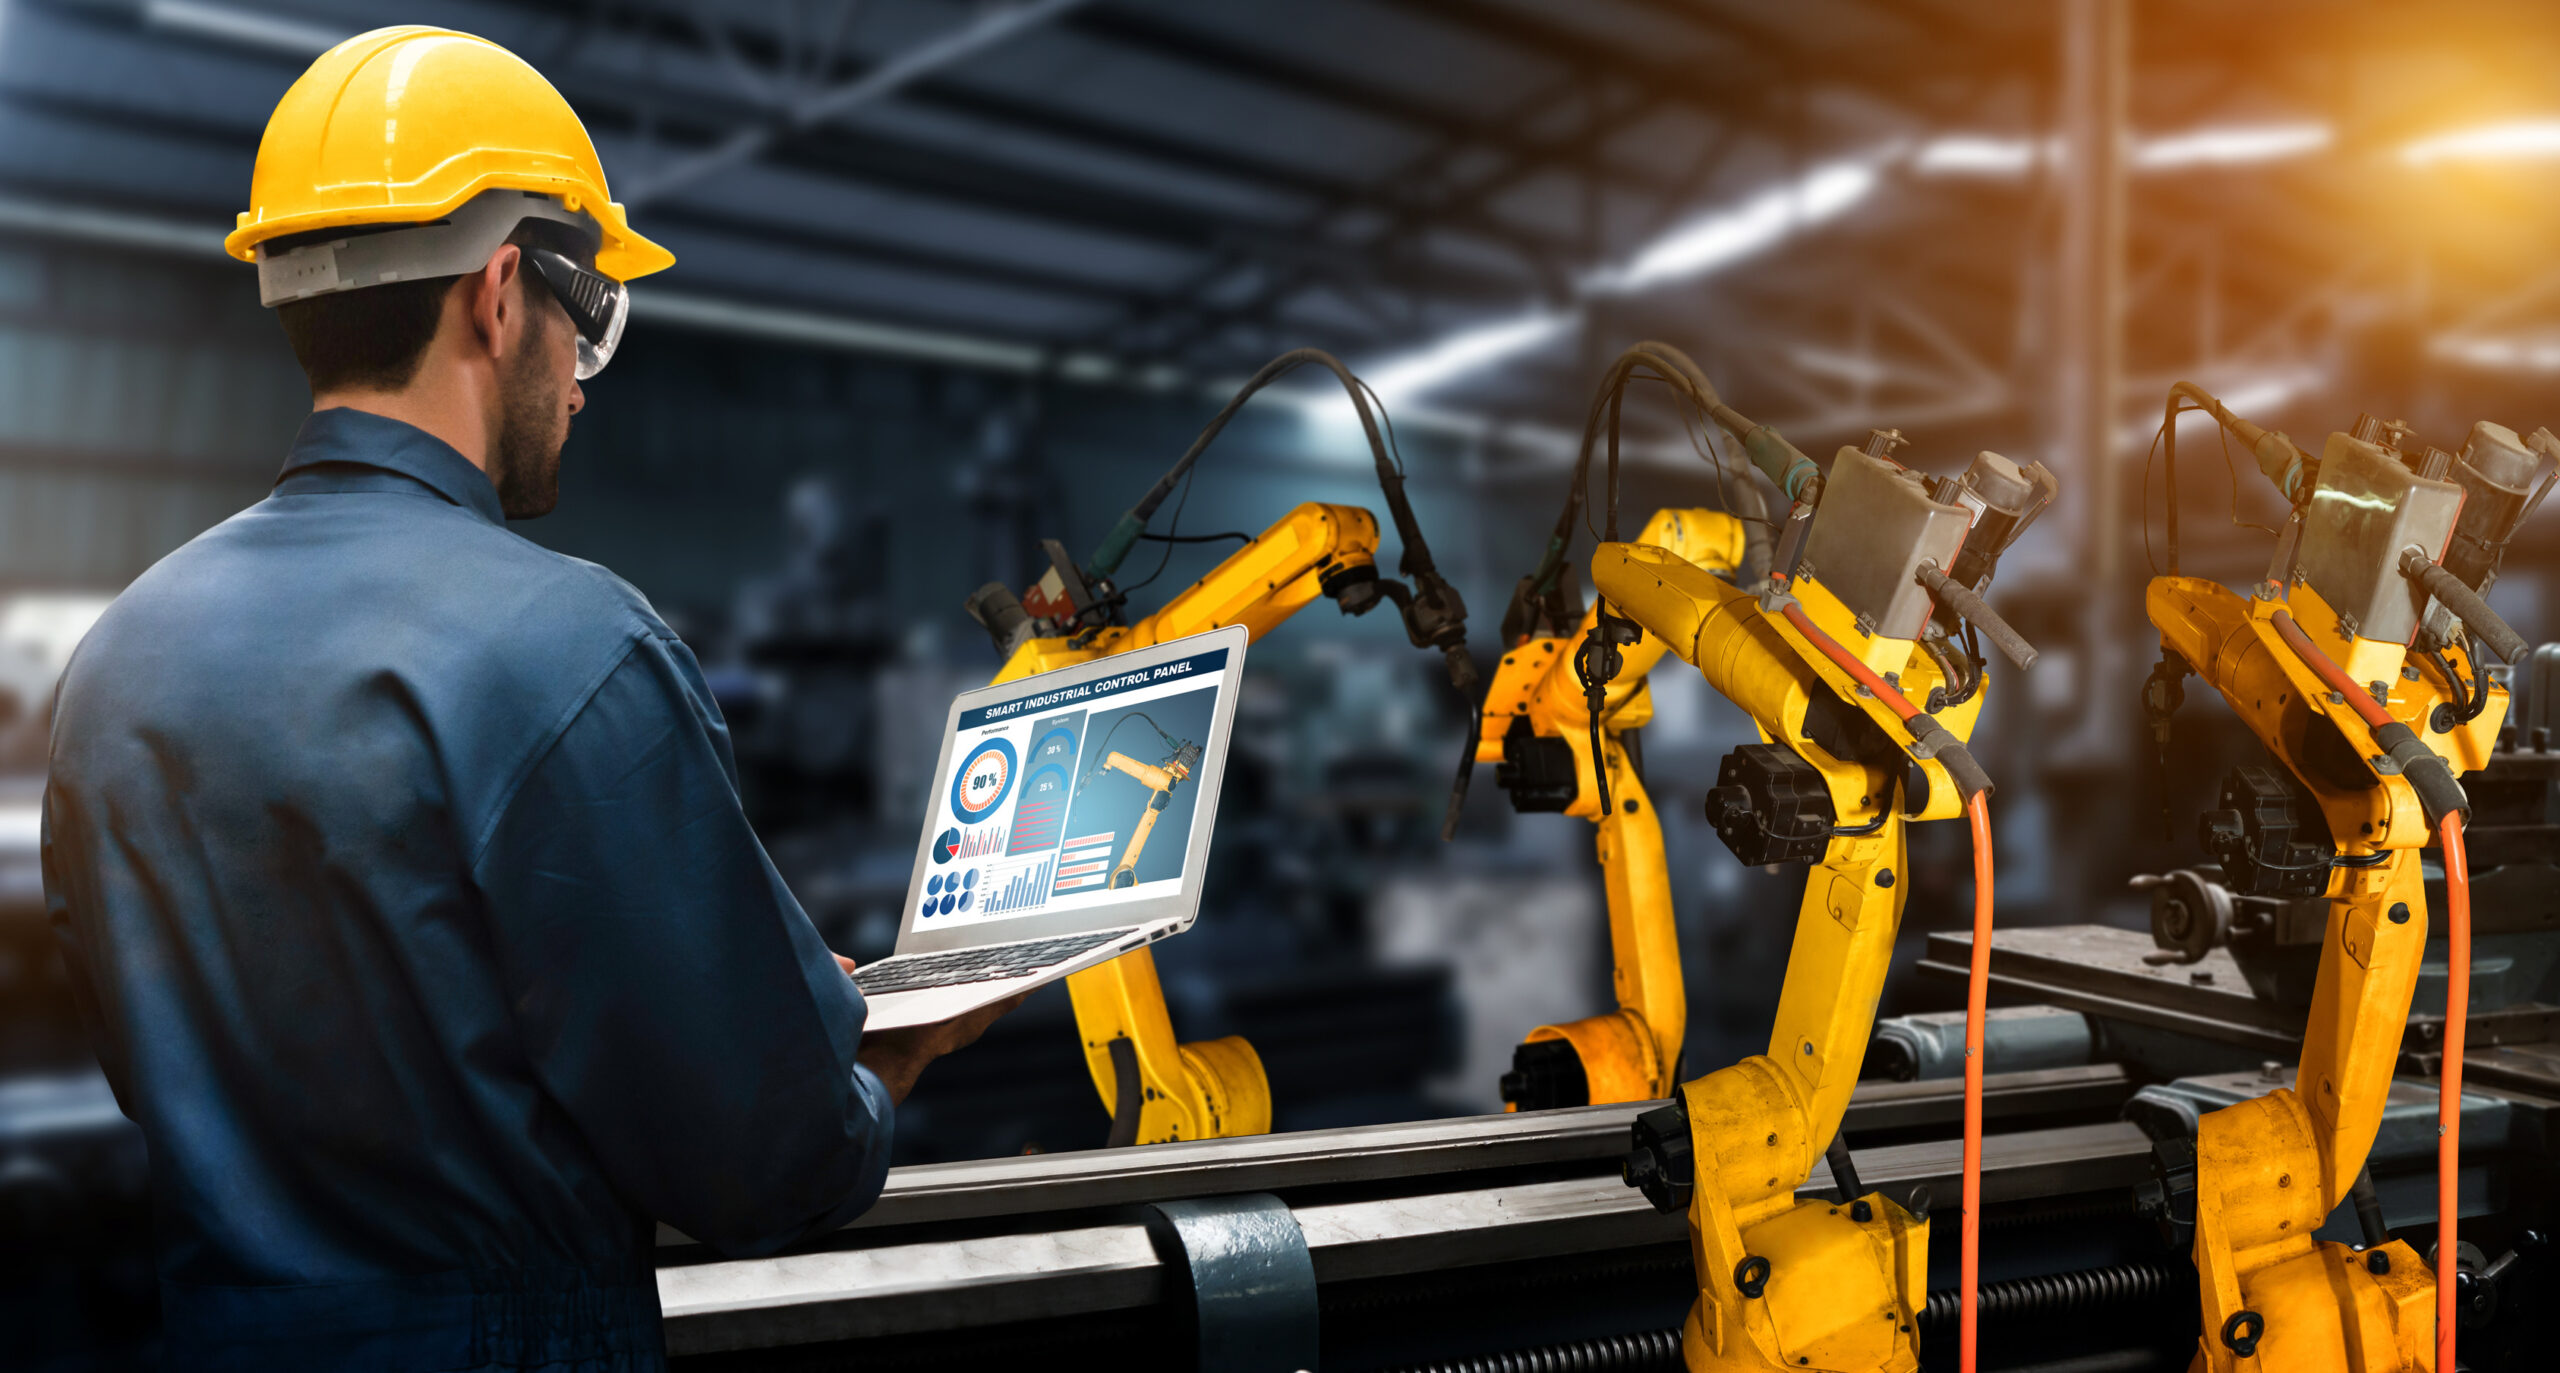 Get connected and take control with IIoT and Predictive Analytics